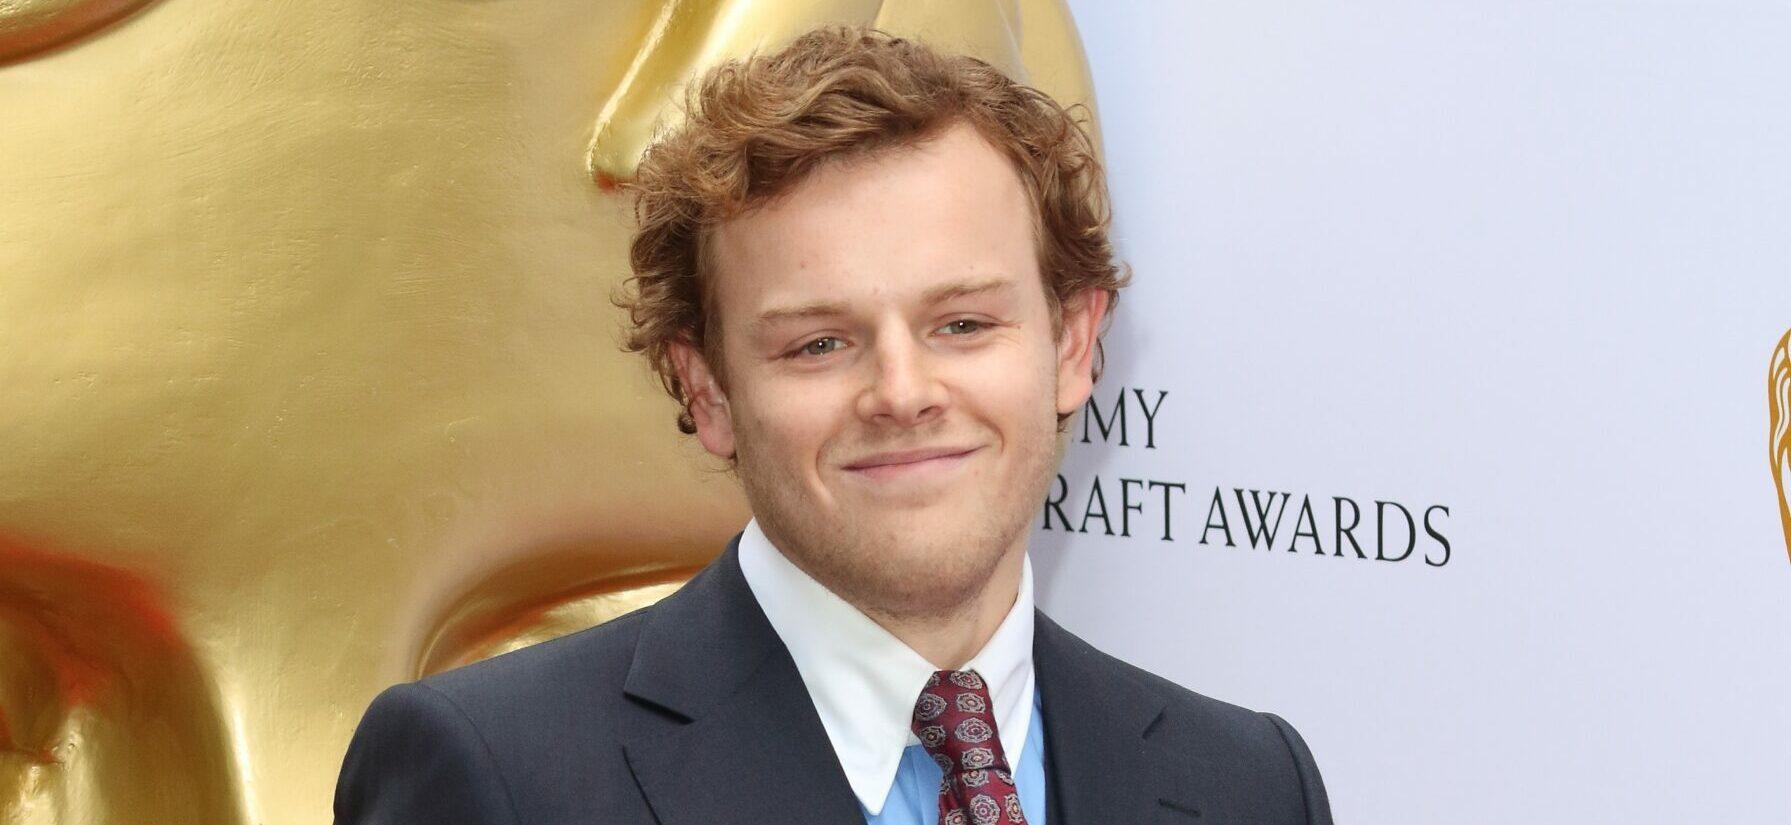 British Academy (BAFTA) Television Craft Awards at The Brewery, Chiswell Street. 28 Apr 2019 Pictured: Callum Woodhouse at the British Academy (BAFTA) Television Craft Awards at The Brewery, Chiswell Street. Photo credit: ZUMAPRESS.com / MEGA TheMegaAgency.com +1 888 505 6342 (Mega Agency TagID: MEGA407588_018.jpg) [Photo via Mega Agency]